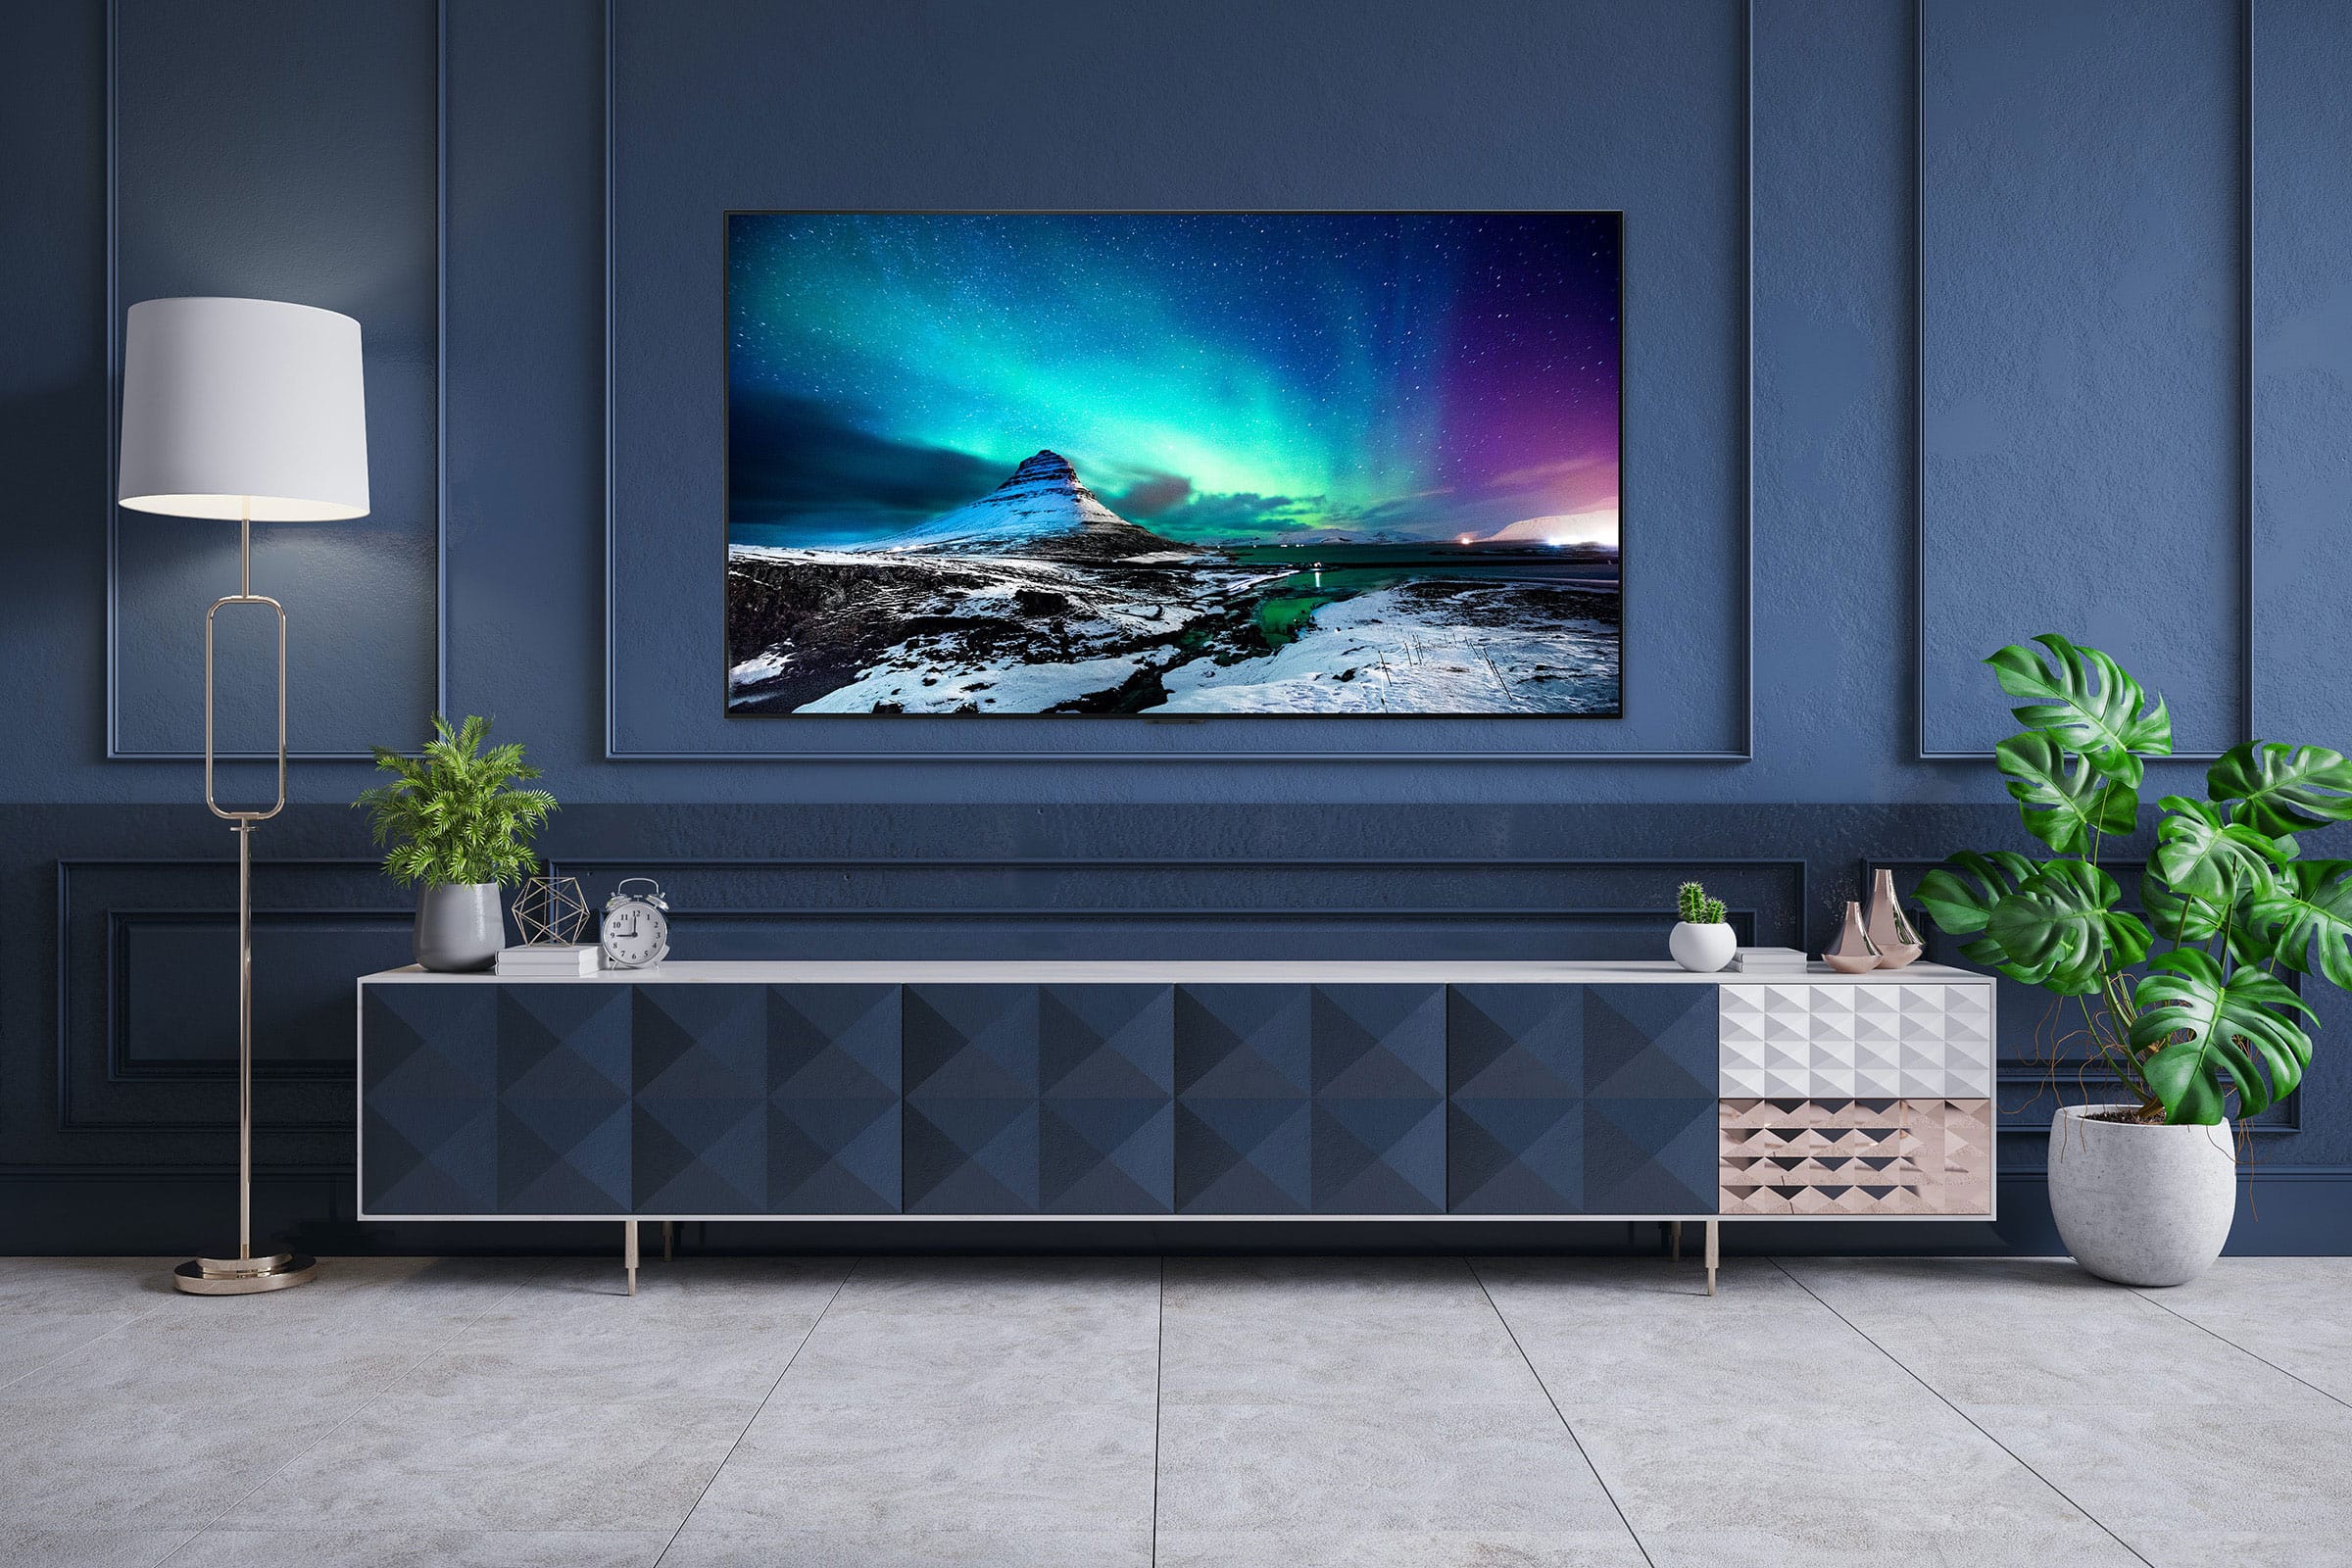 LG bets on small OLED televisions: 42 inches will be a reality in 2022